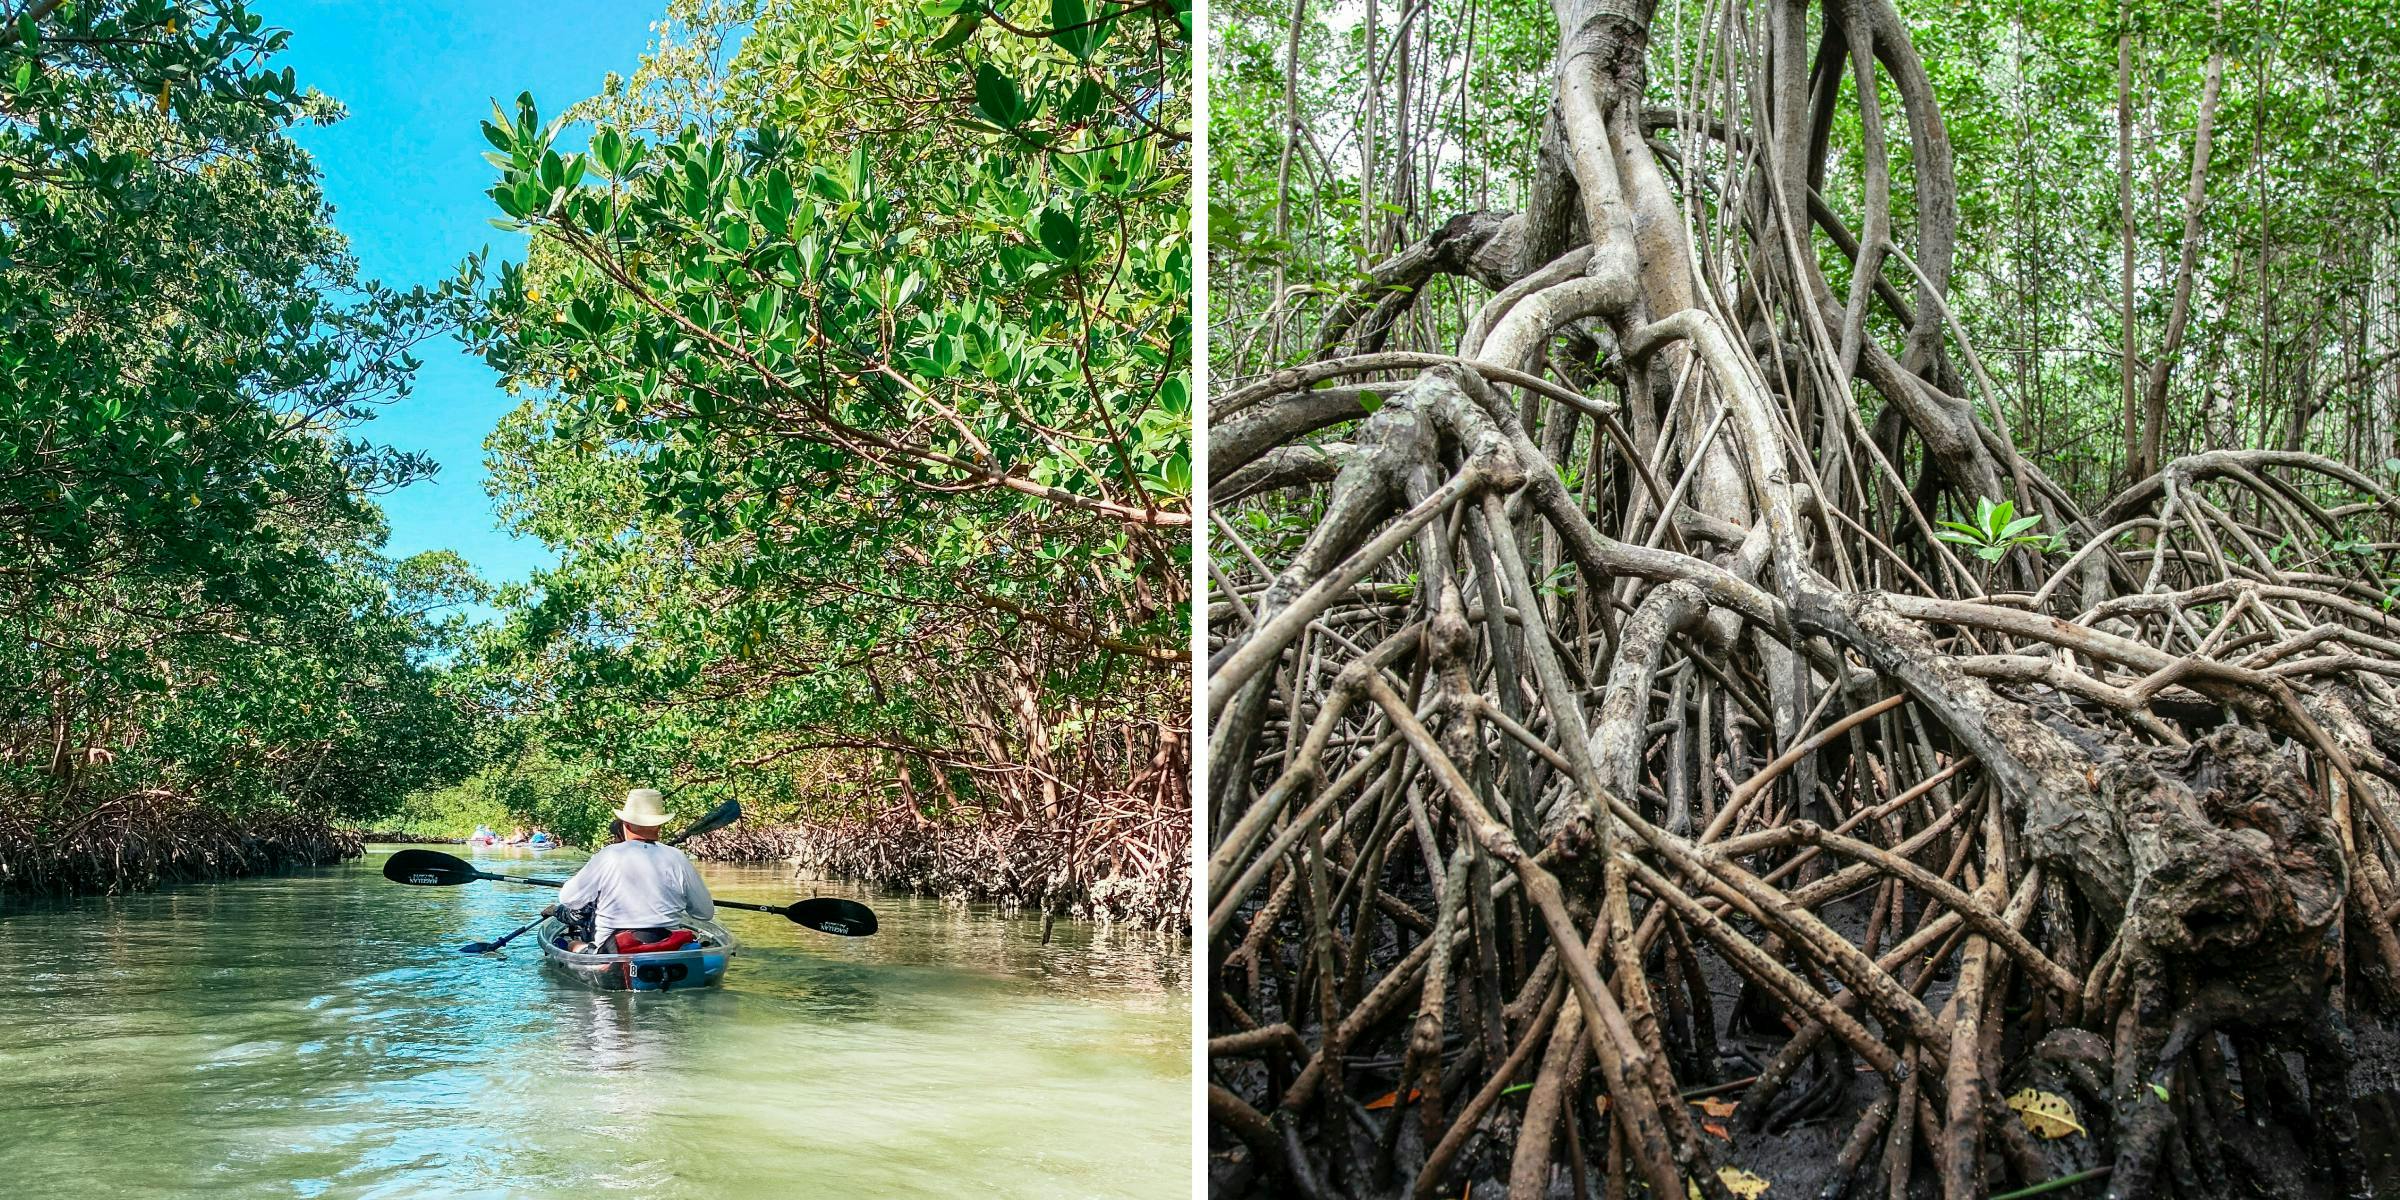 Photos showing a canoe travelling through a river with mangroves on either side; and a mangrove tree with twisted roots.